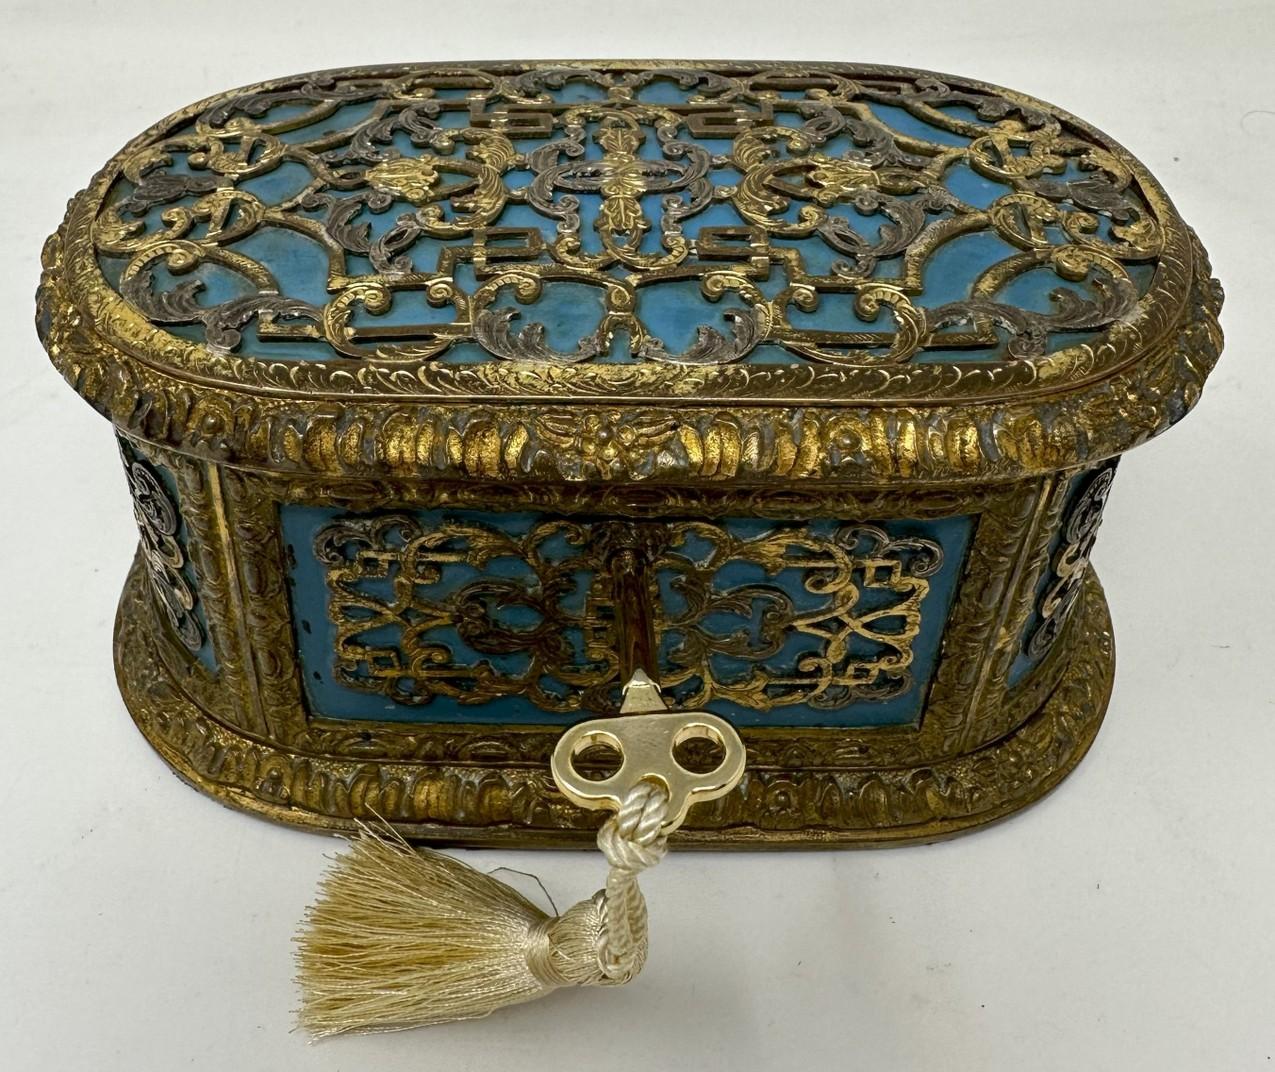 An extremely stylish French Gilt Bronze Ladies Jewellery heavy gauge dome topped Casket of outstanding quality. Third quarter of the Nineteenth Century.  

The main outer body superbly decorated in filigree style scrolling panel decoration on a blue